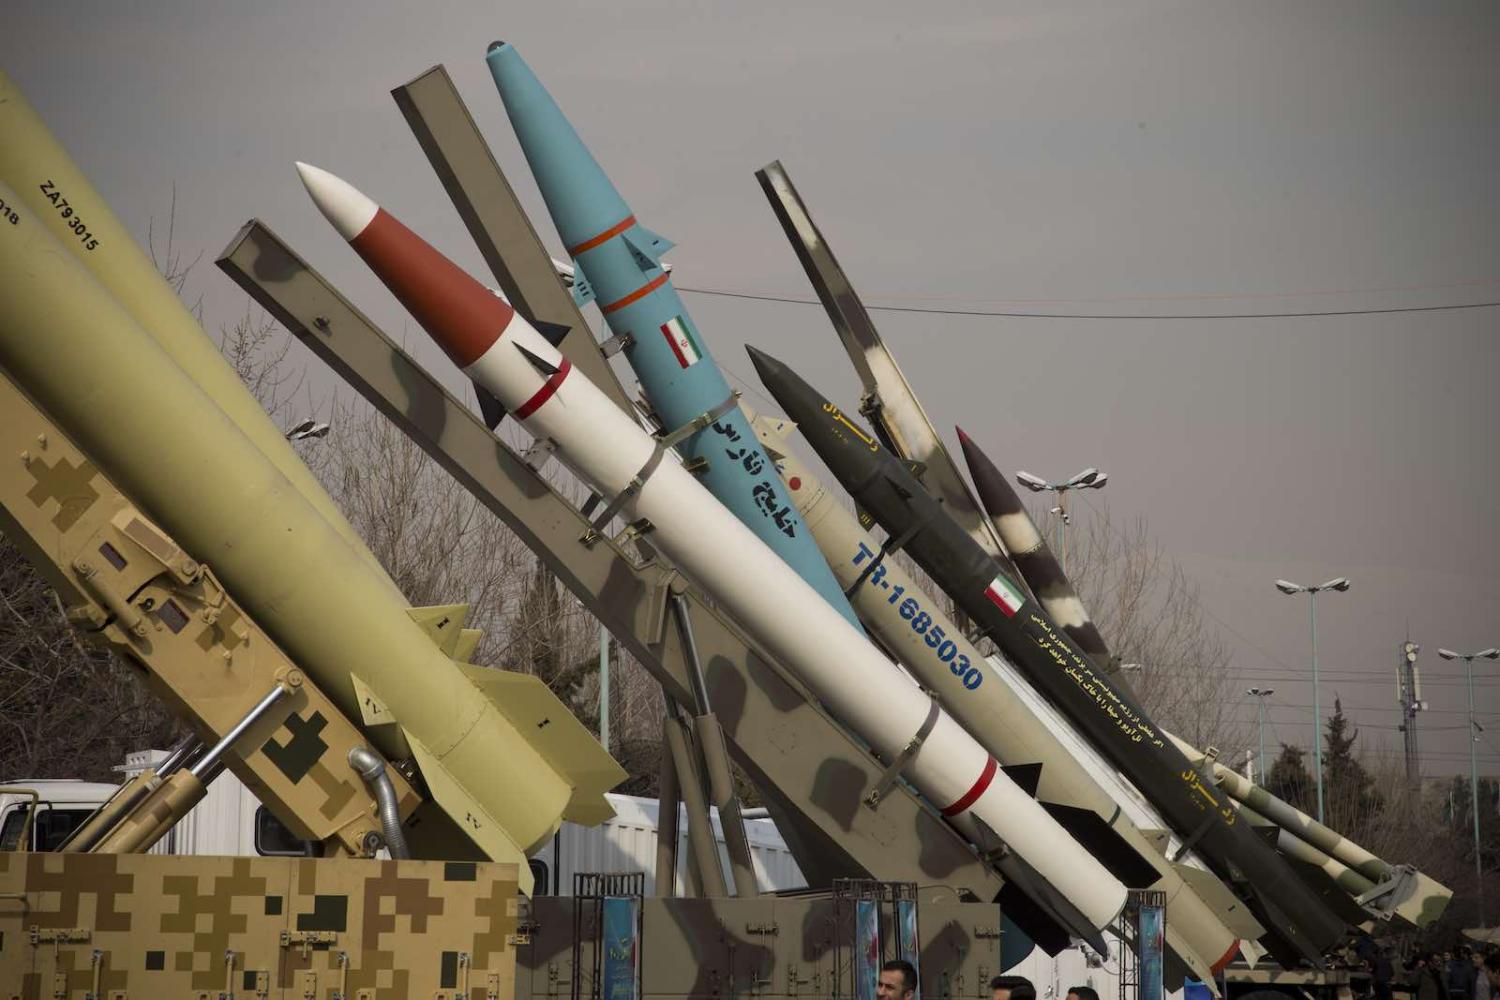 A weaponry and military equipment exhibition on the occasion of the 40th anniversary of the Iranian revolution, Tehran, 7 February  2019 (Photo: Rouzbeh Fouladi/NurPhoto via Getty)